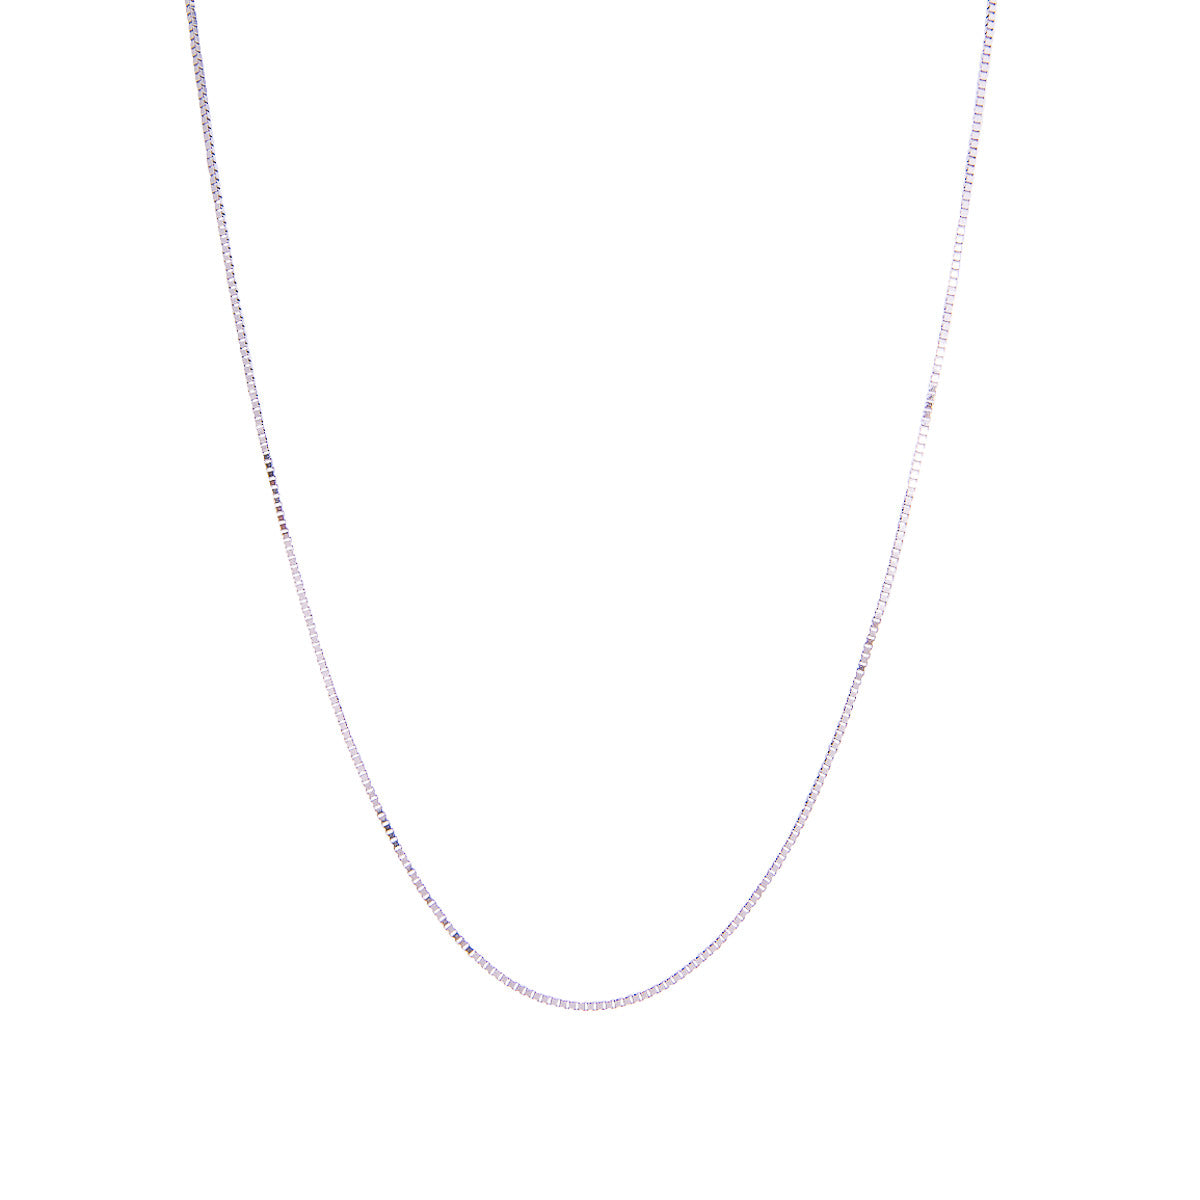 Fink's Jewelers .8mm Box Chain Necklace in 14K White Gold